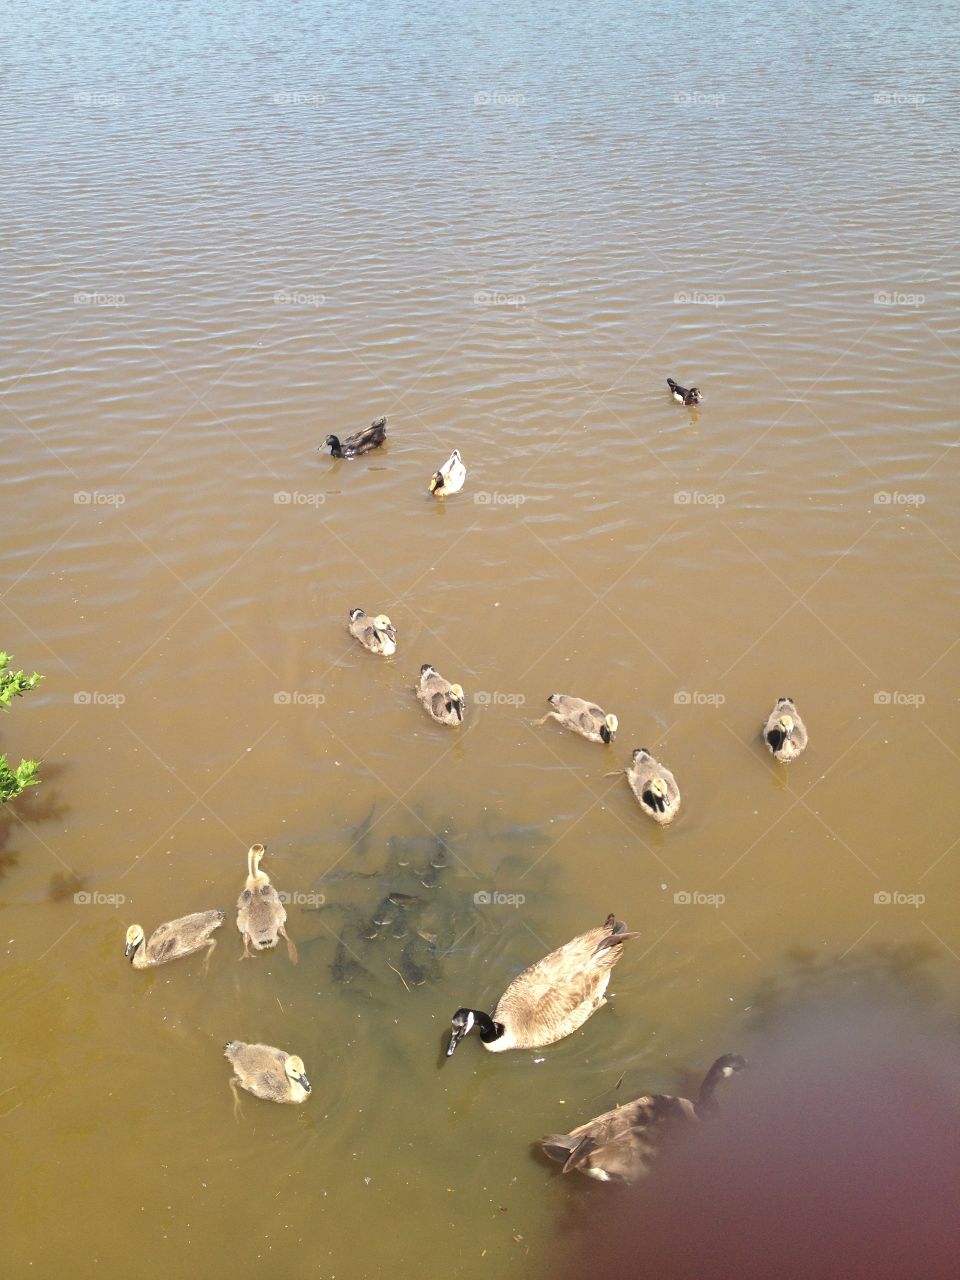 Geese and catfish . Geese, goslings, and catfish in a lake